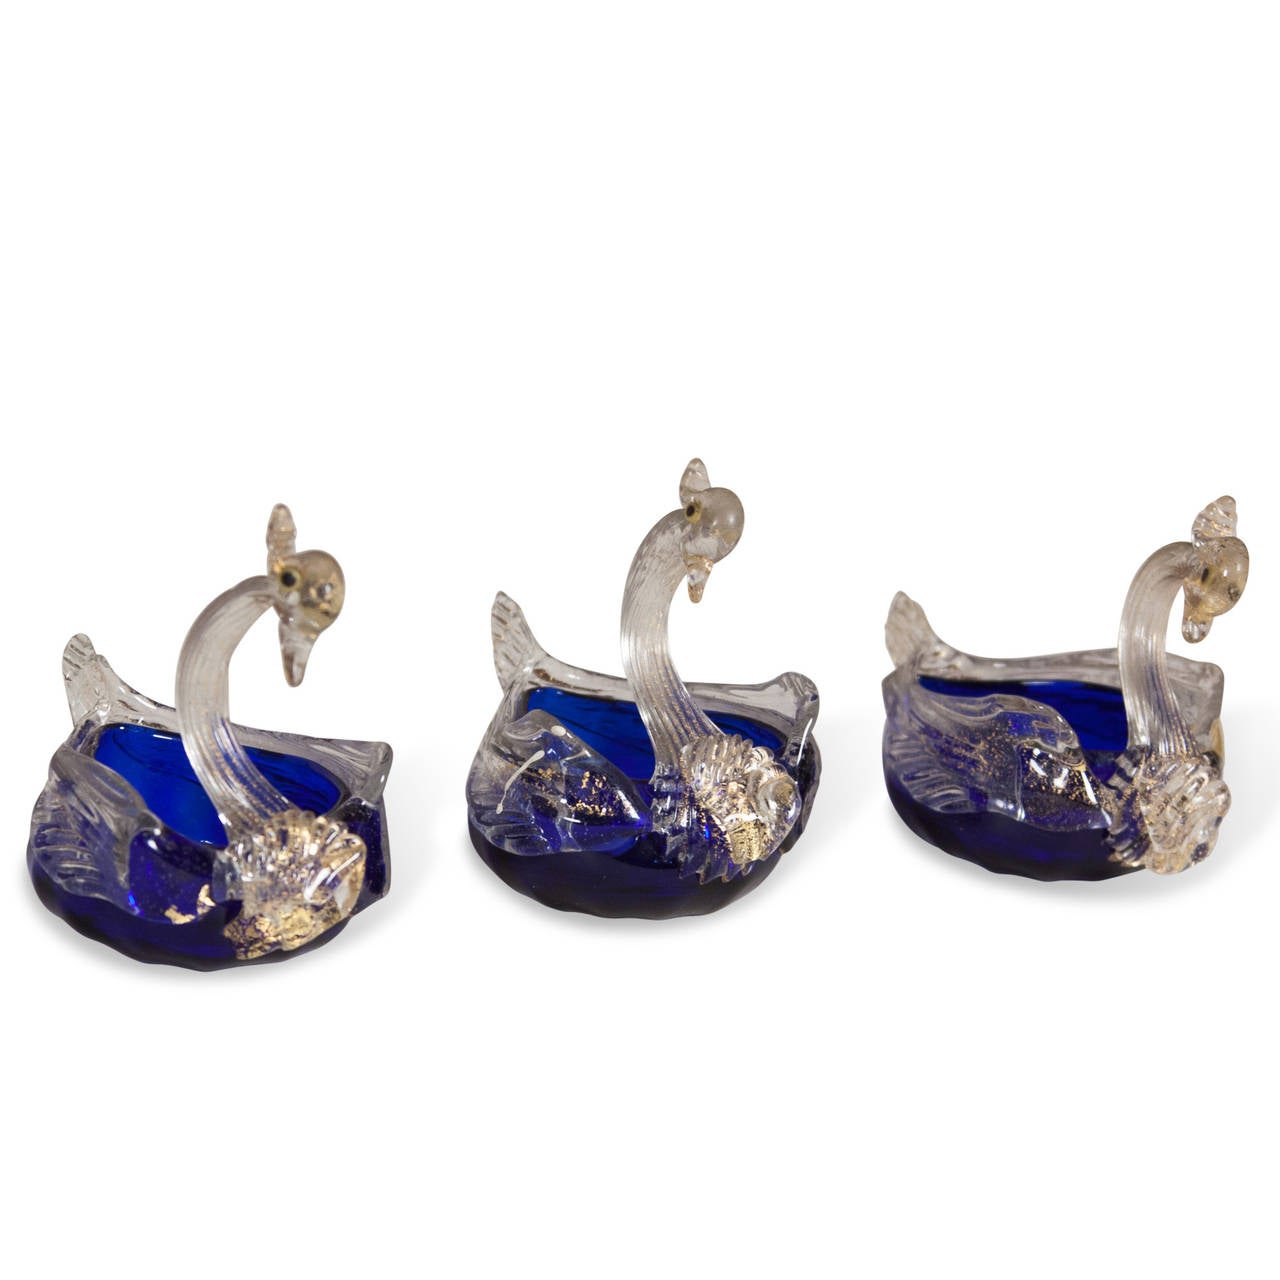 1960s Murano Glass Swans, Set of Three In Excellent Condition For Sale In Brooklyn, NY